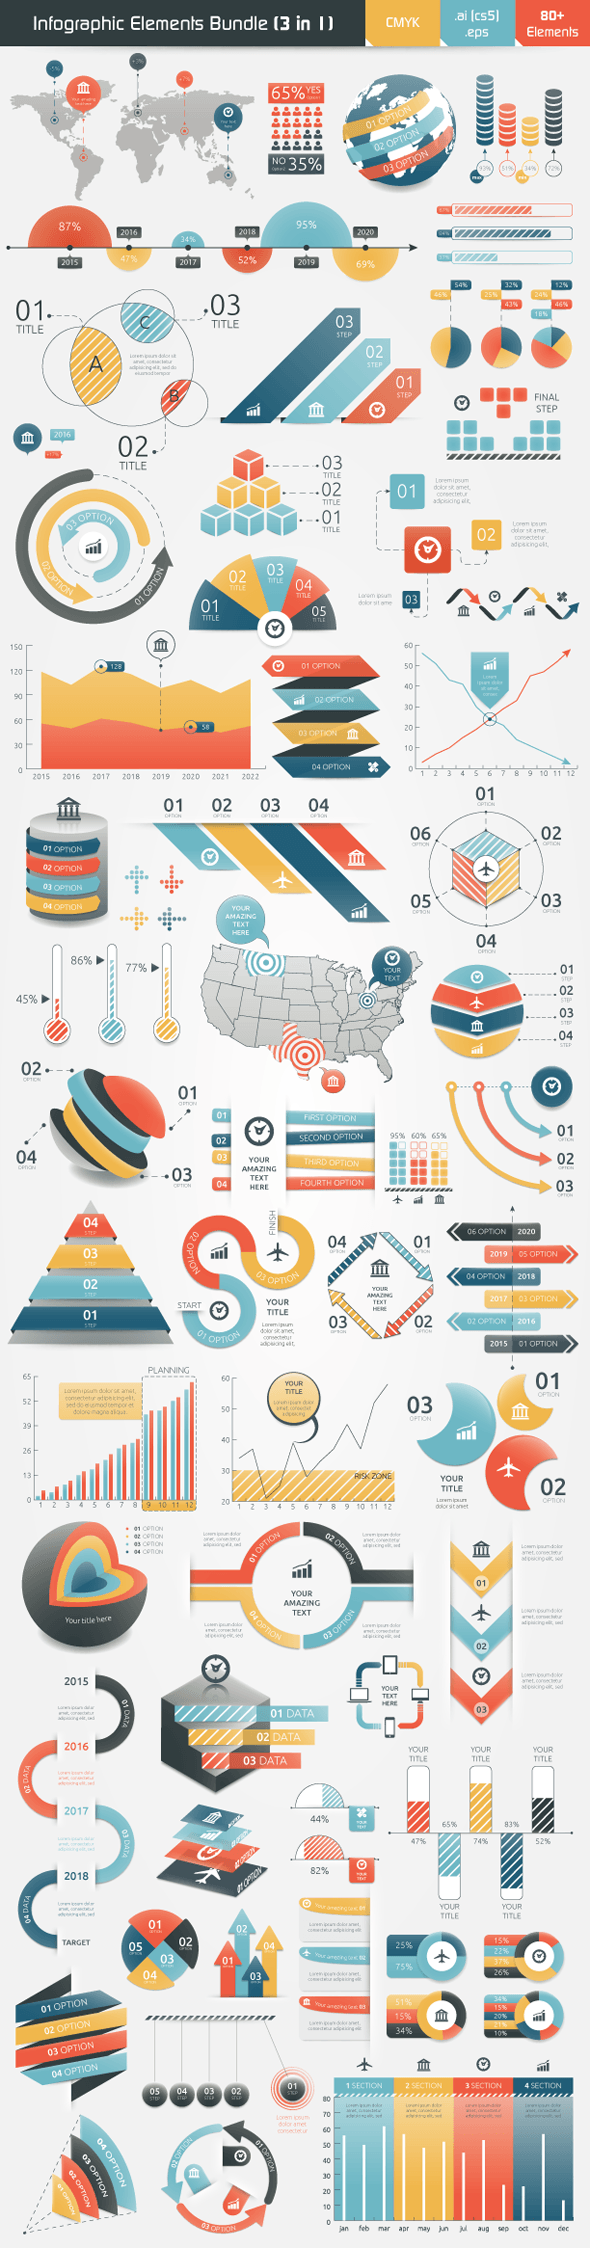 Infographic elements business Business growth infographic chart Data visualization diagram earth graph icons infographic bundle Collection bundle